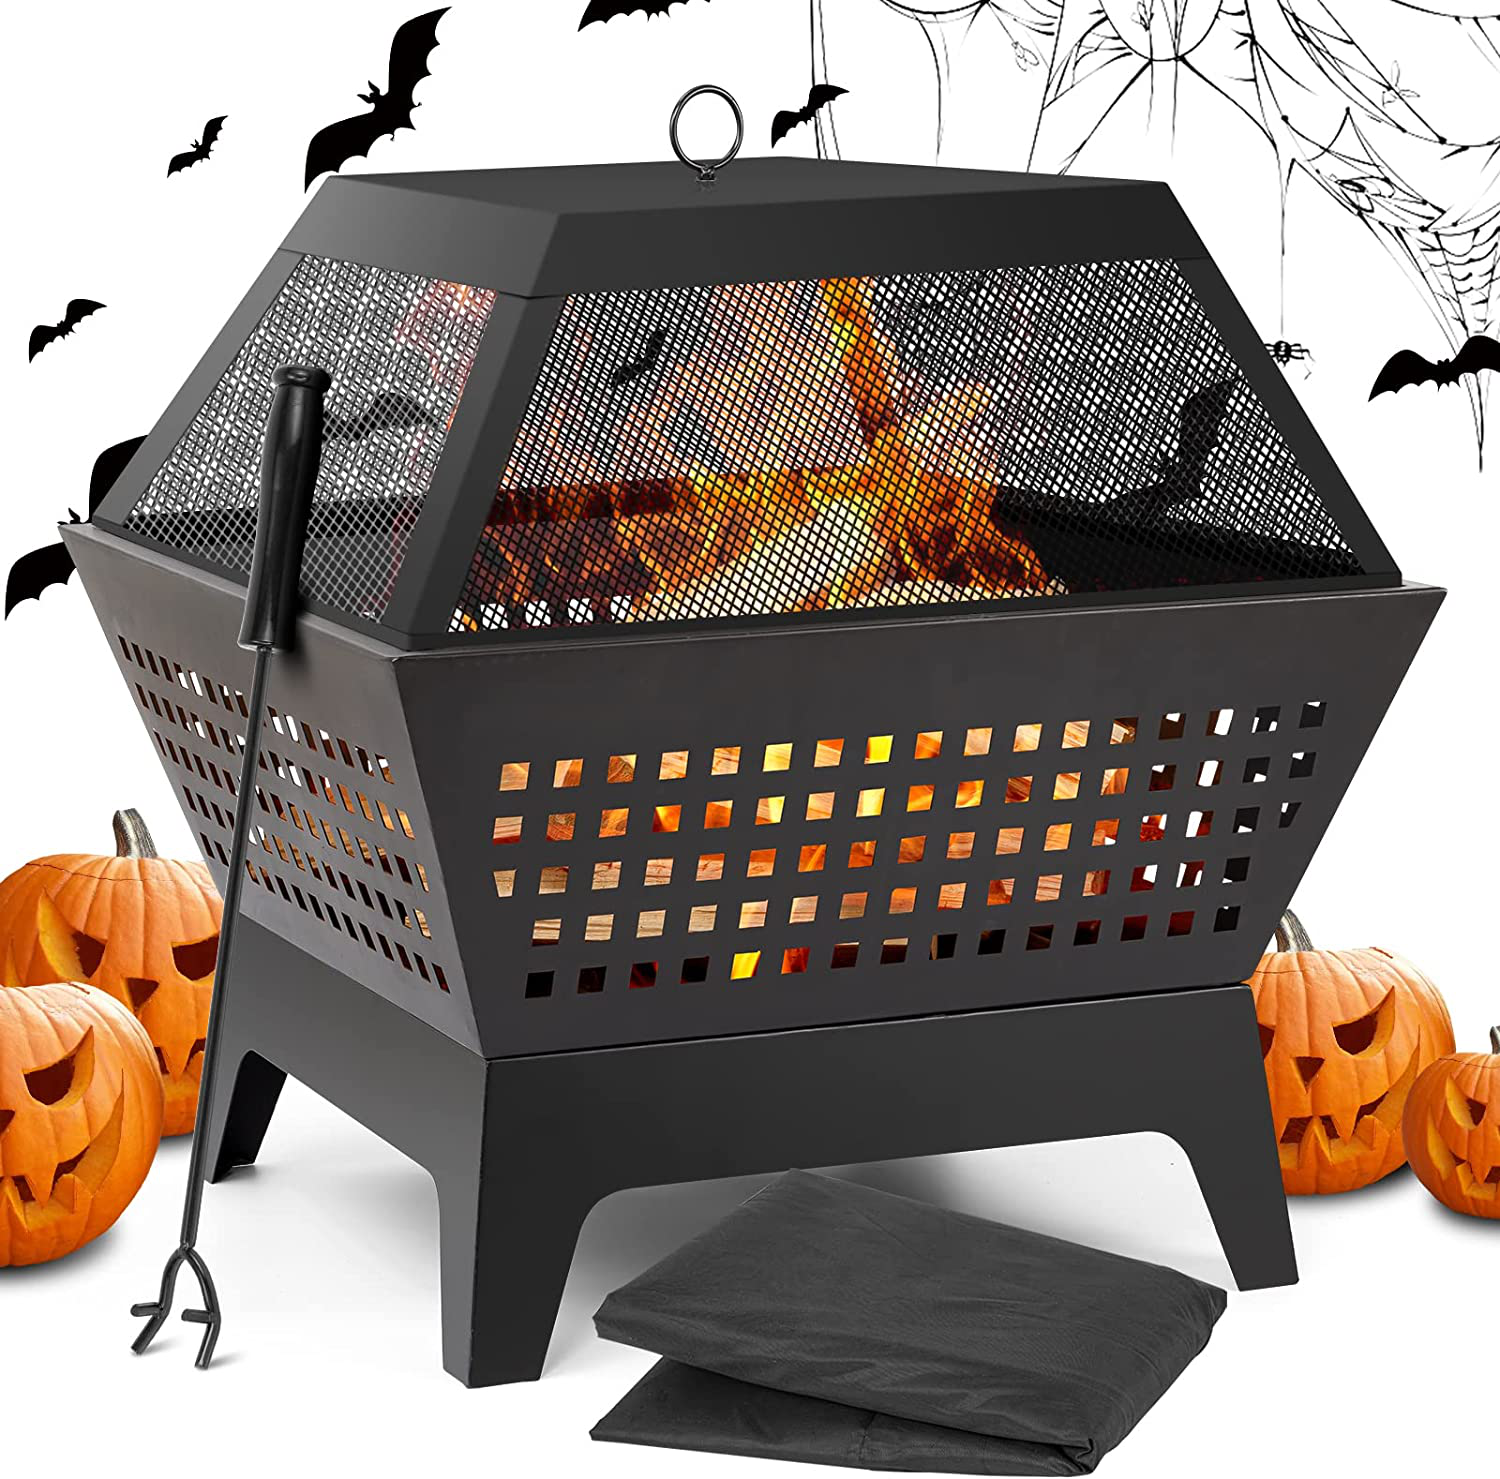 Amagabeli Fire Pit with Waterproof Cover Outdoor Wood Burning 24.4in Firepit Firebowl Fireplace Poker Spark Screen Retardant Mesh Lid Extra Deep Large Square Backyard Deck Heavy Duty Grate Black